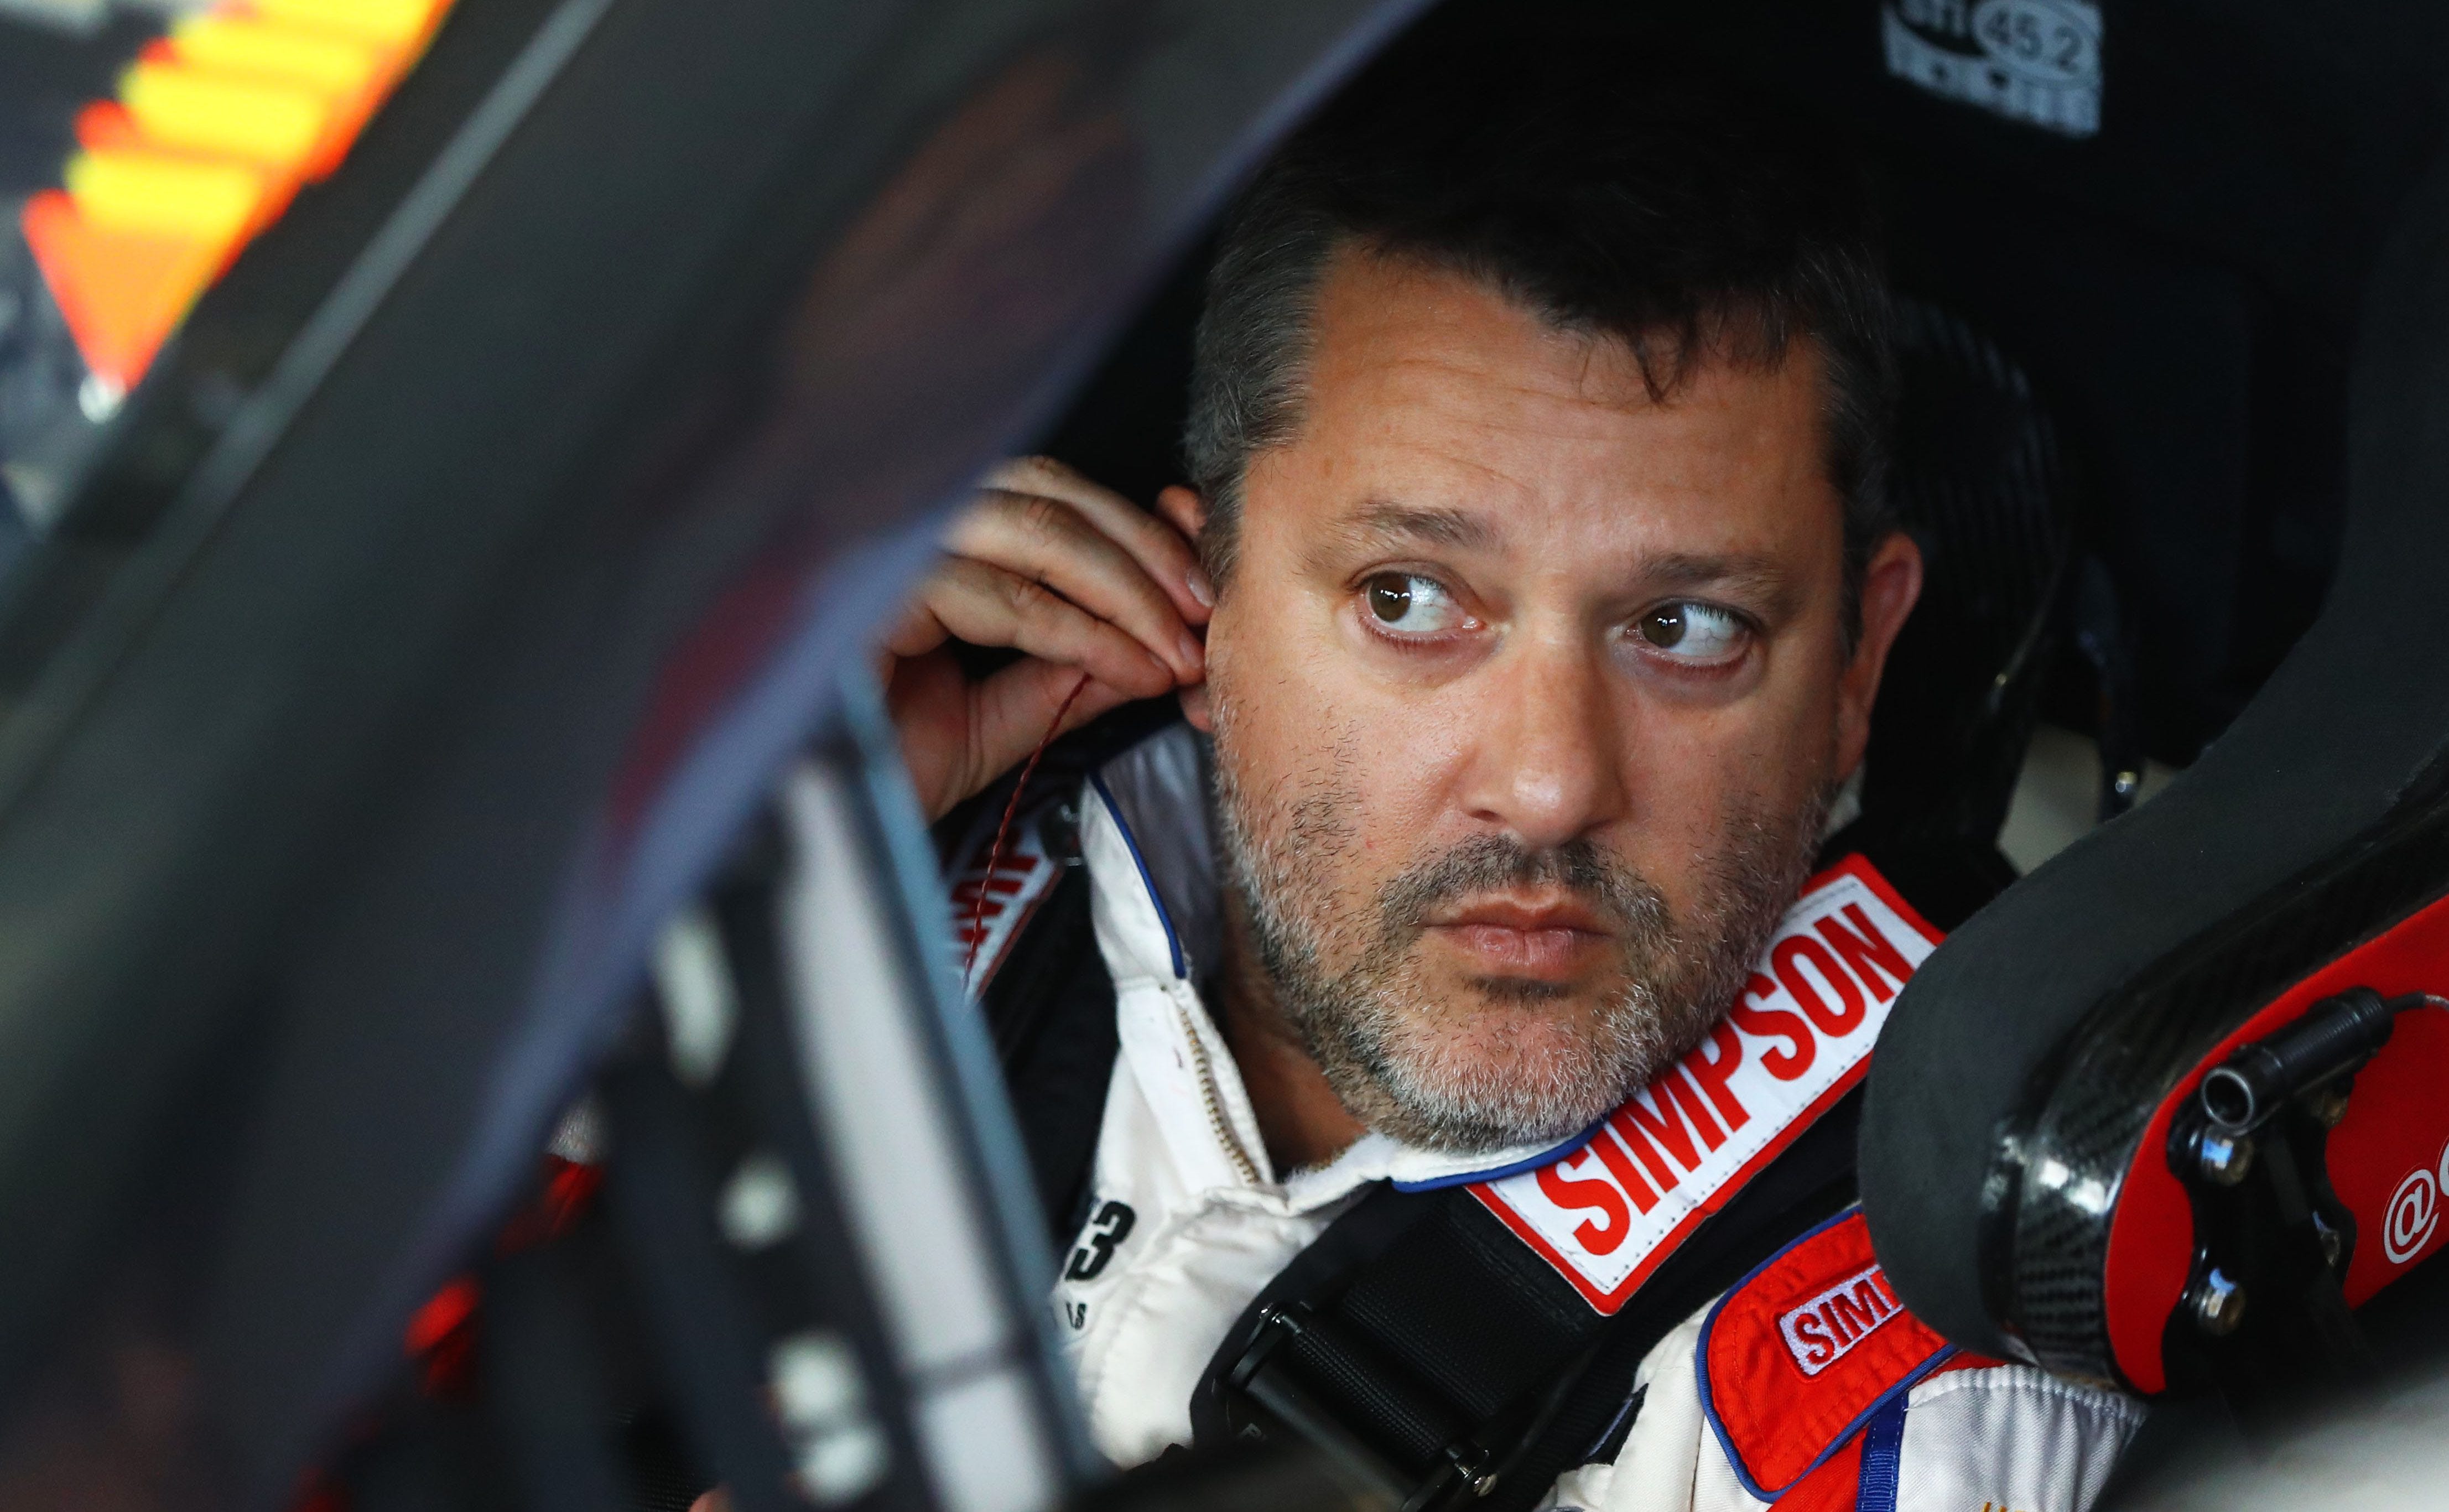 Tony Stewart crashes while racing in New Zealand